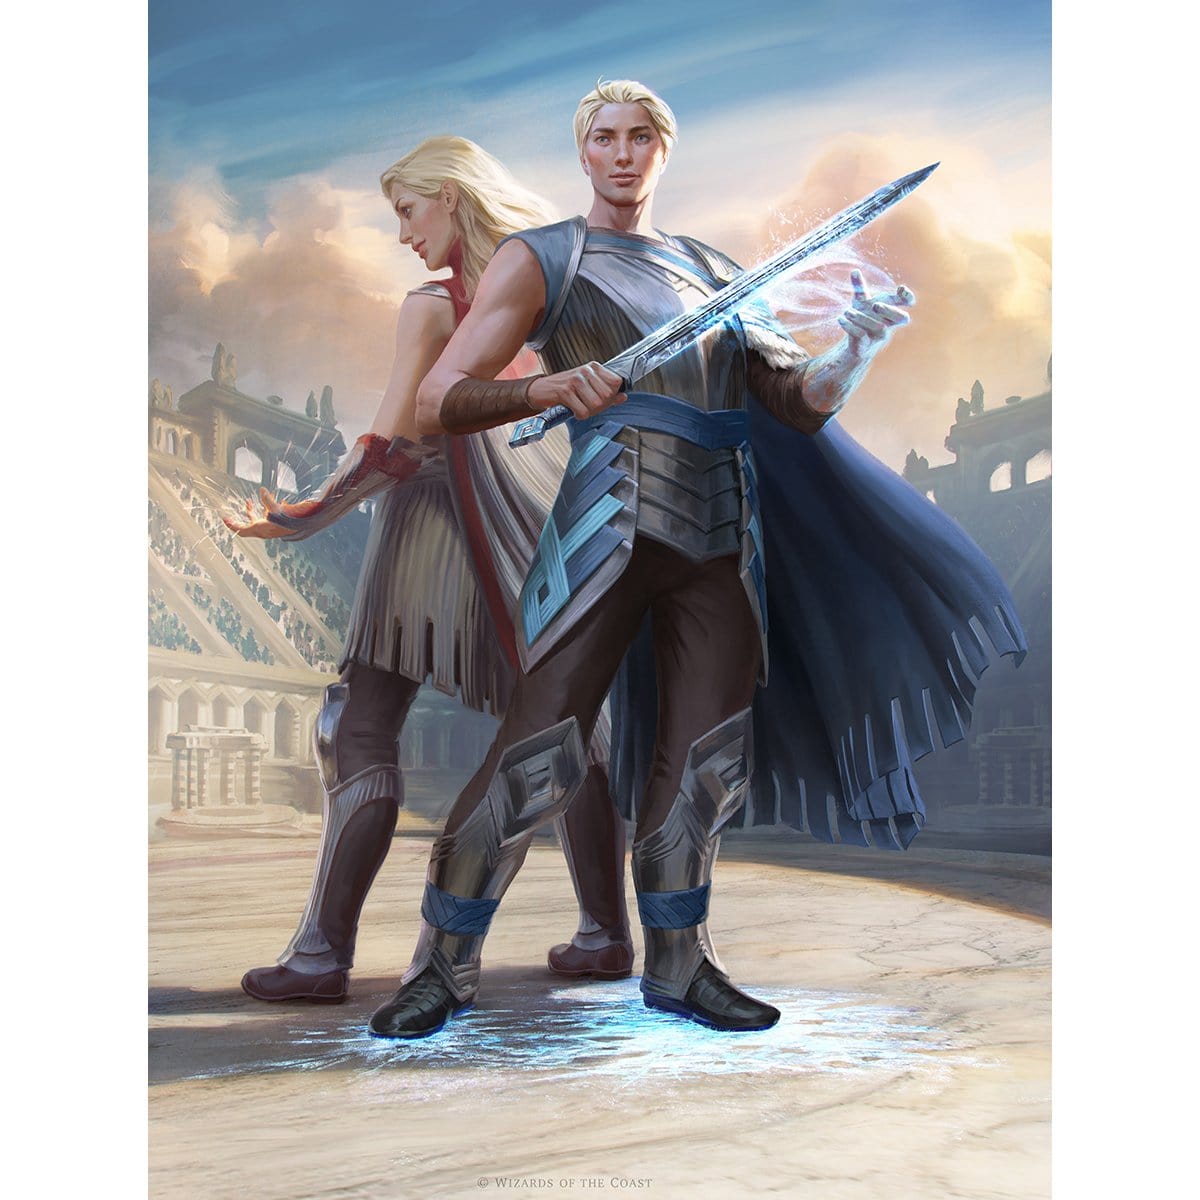 Will Kenrith Print - Print - Original Magic Art - Accessories for Magic the Gathering and other card games